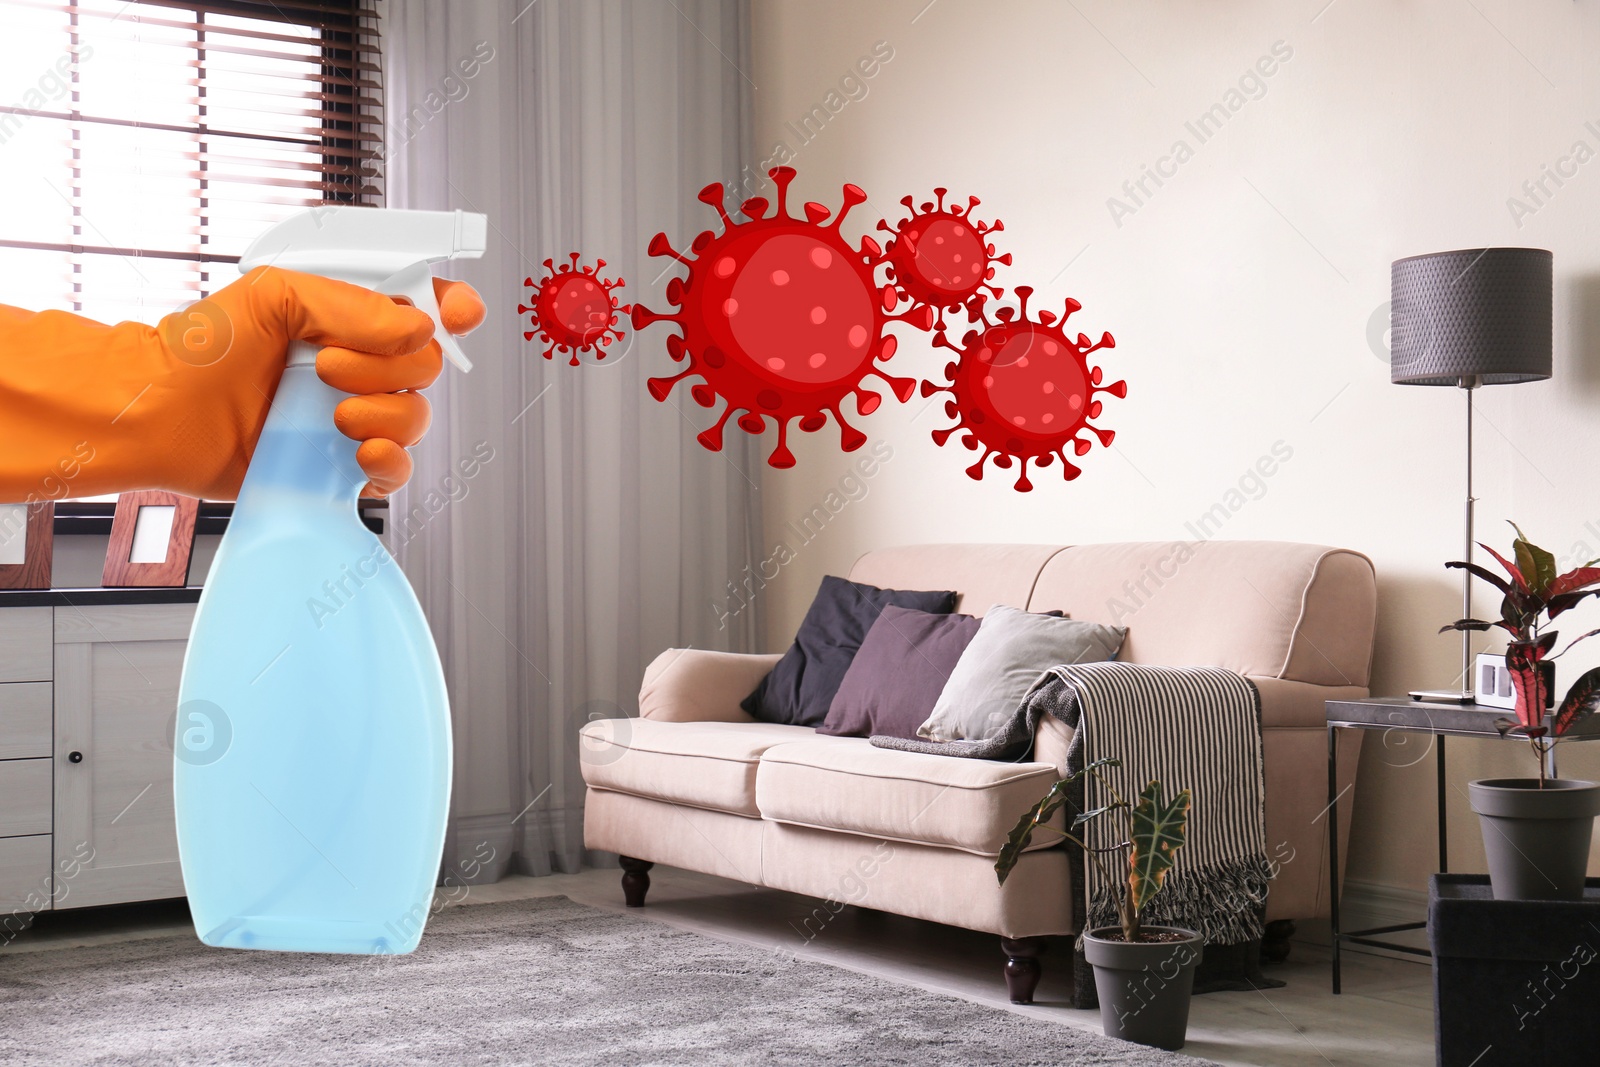 Image of Keep your home virus-free. Woman cleaning room with disinfecting solution 